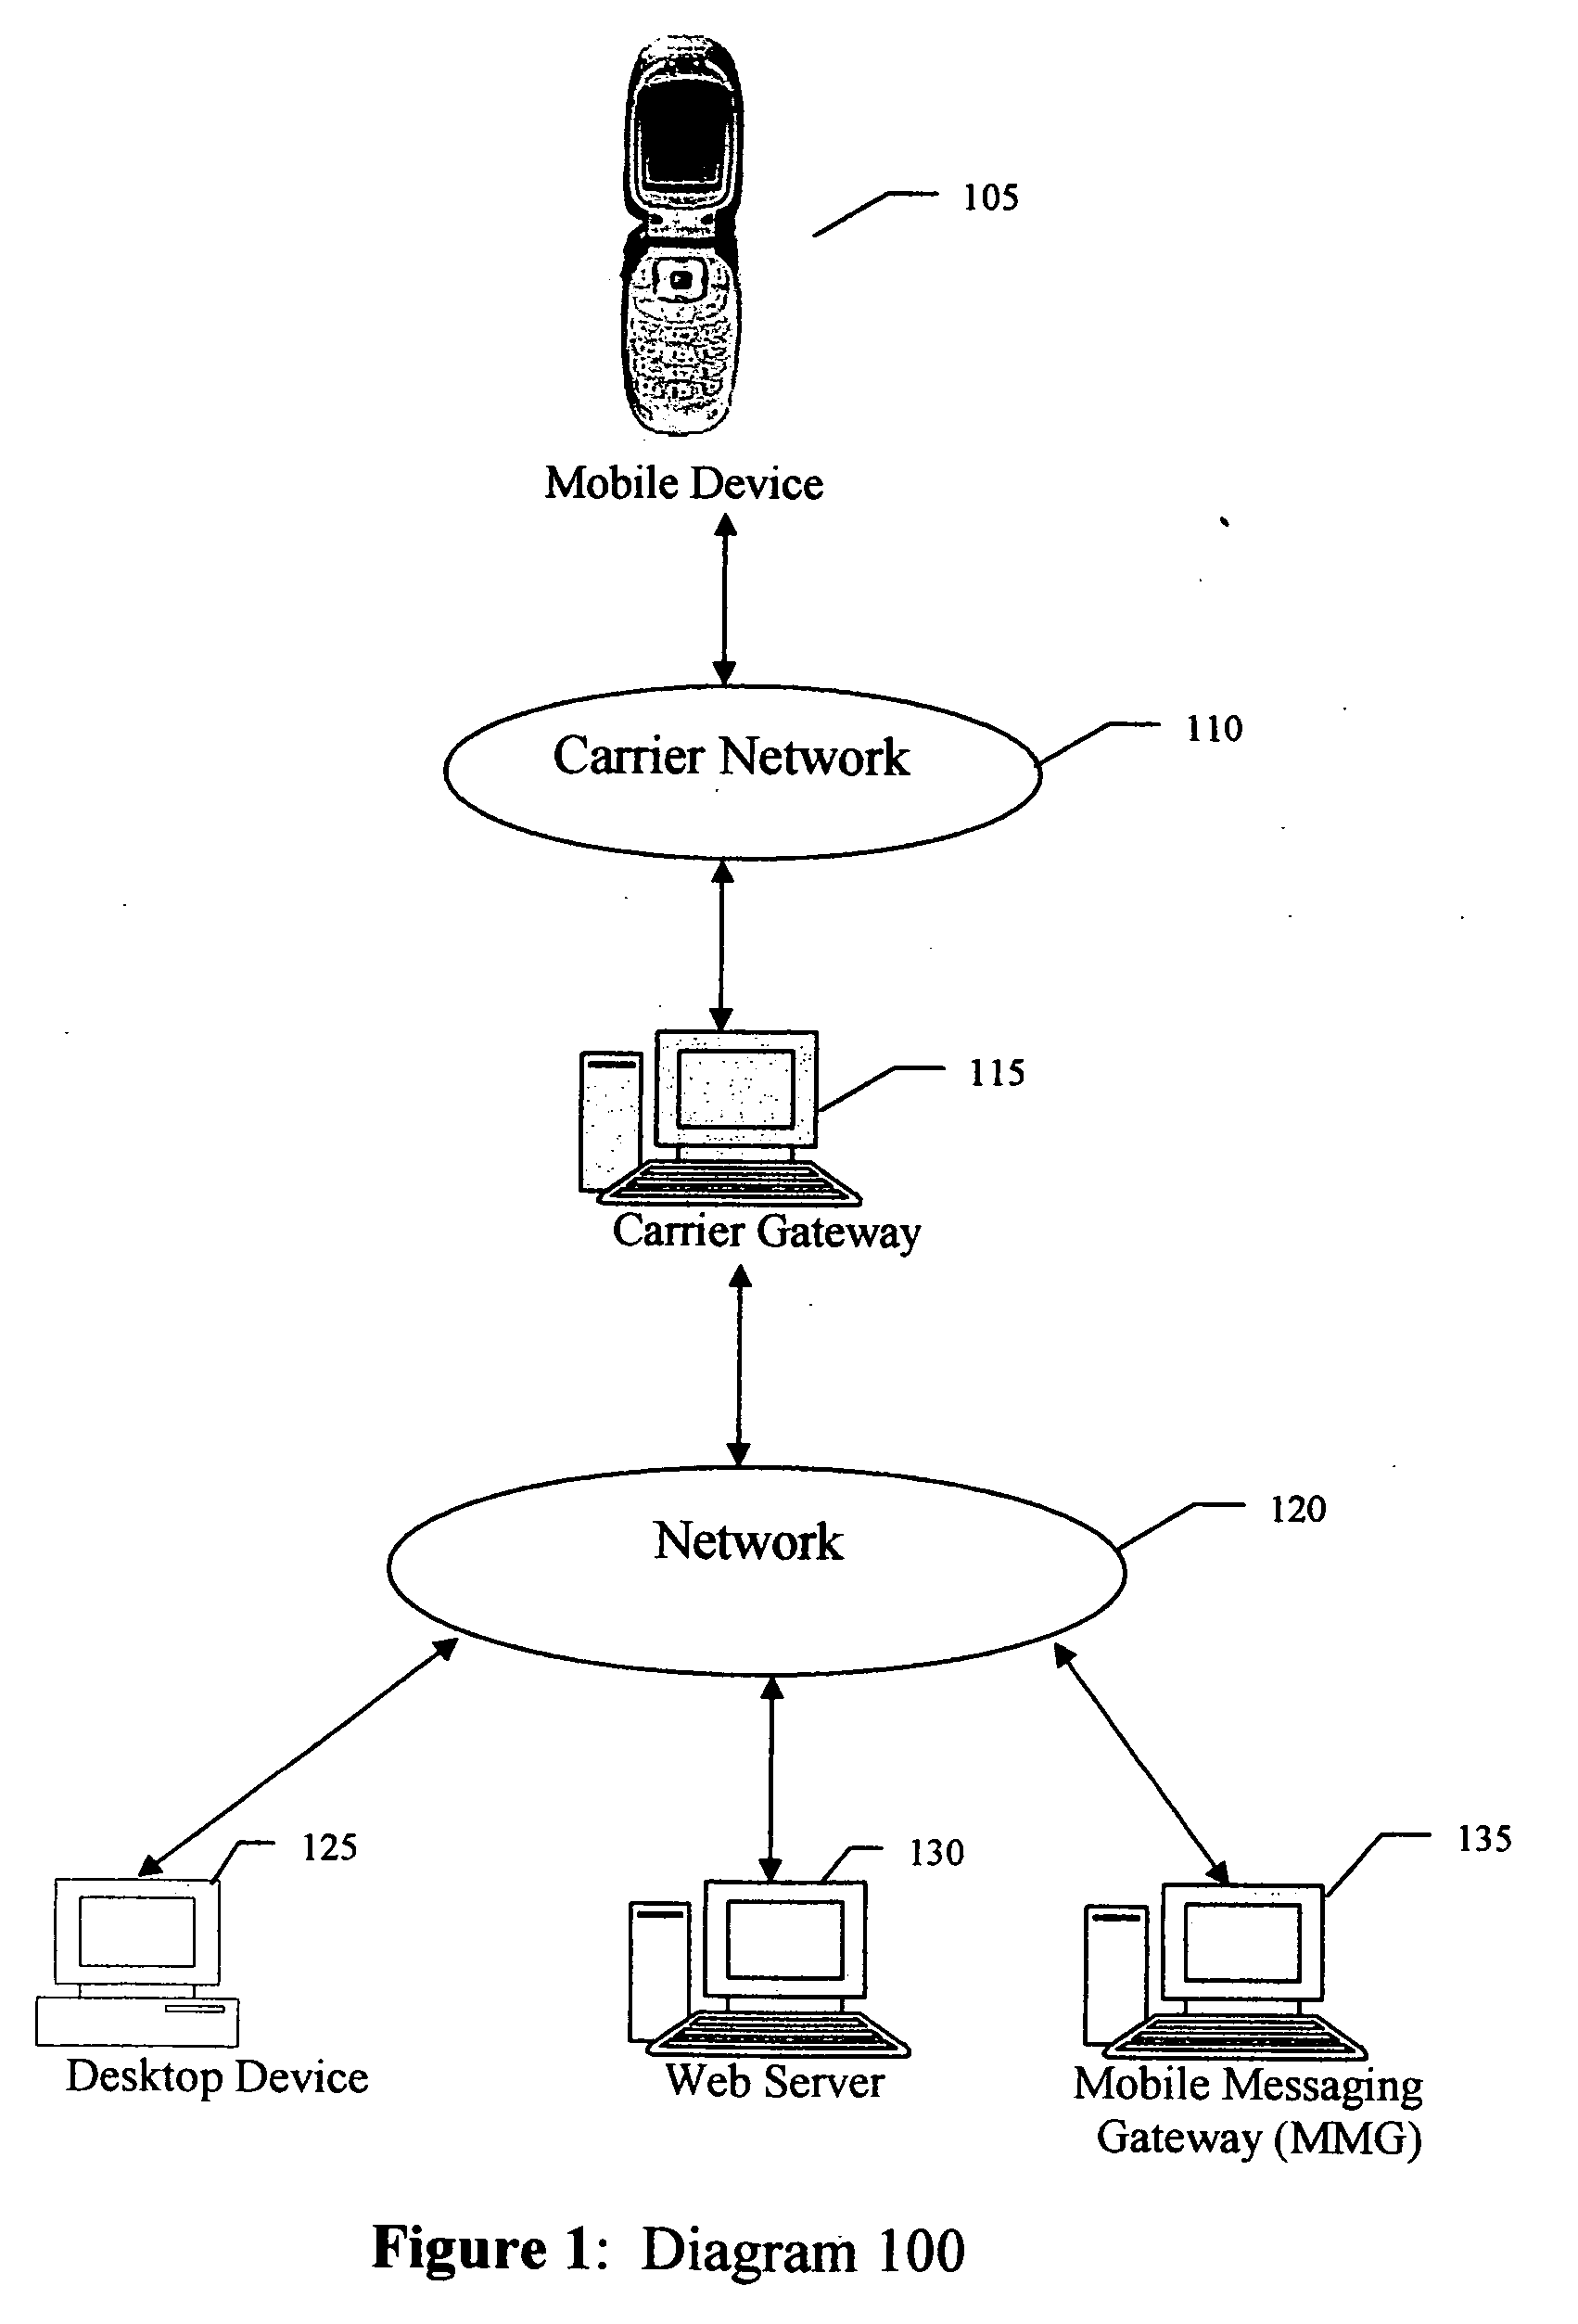 Scheme of sending email to mobile devices